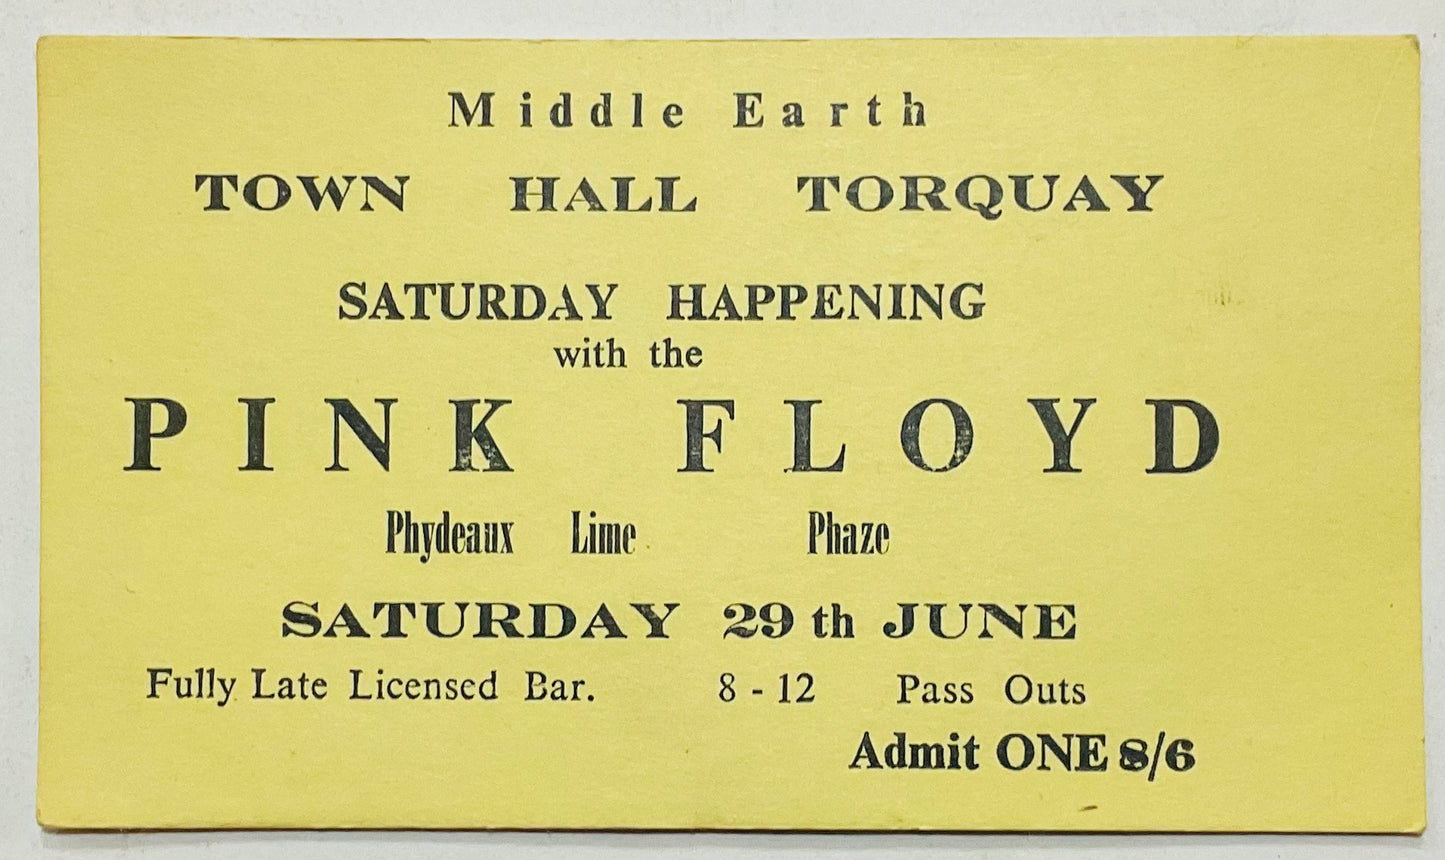 Pink Floyd Original Concert Ticket Middle Earth Town Hall Torquay 29th June 1968